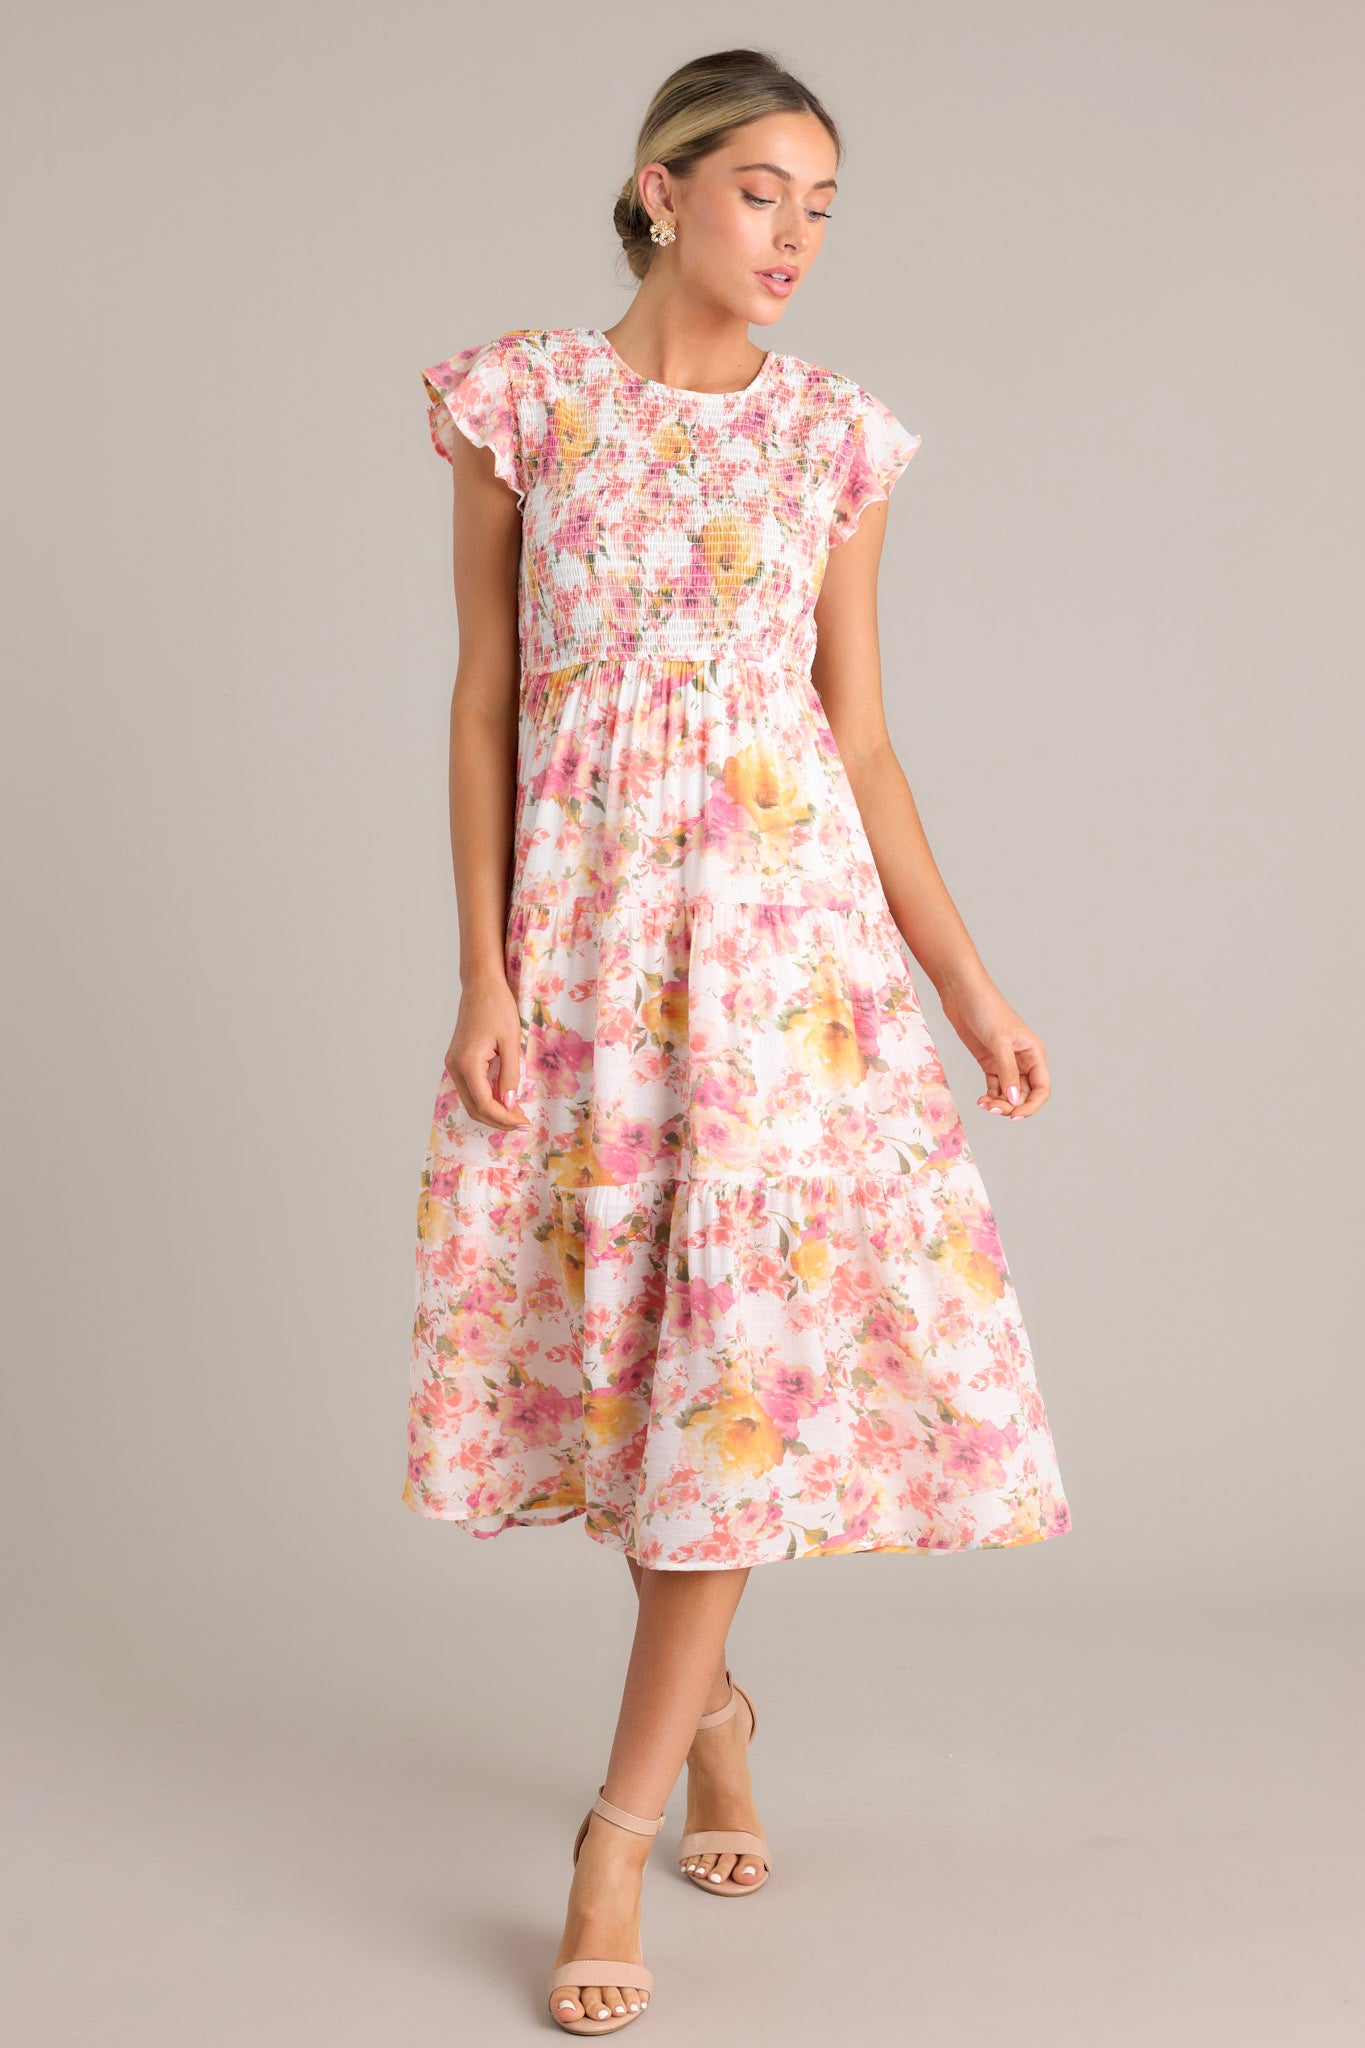 This pink midi dress features a high neckline, flutter sleeves, smocked bodice, tiered layers, and a lively floral design.